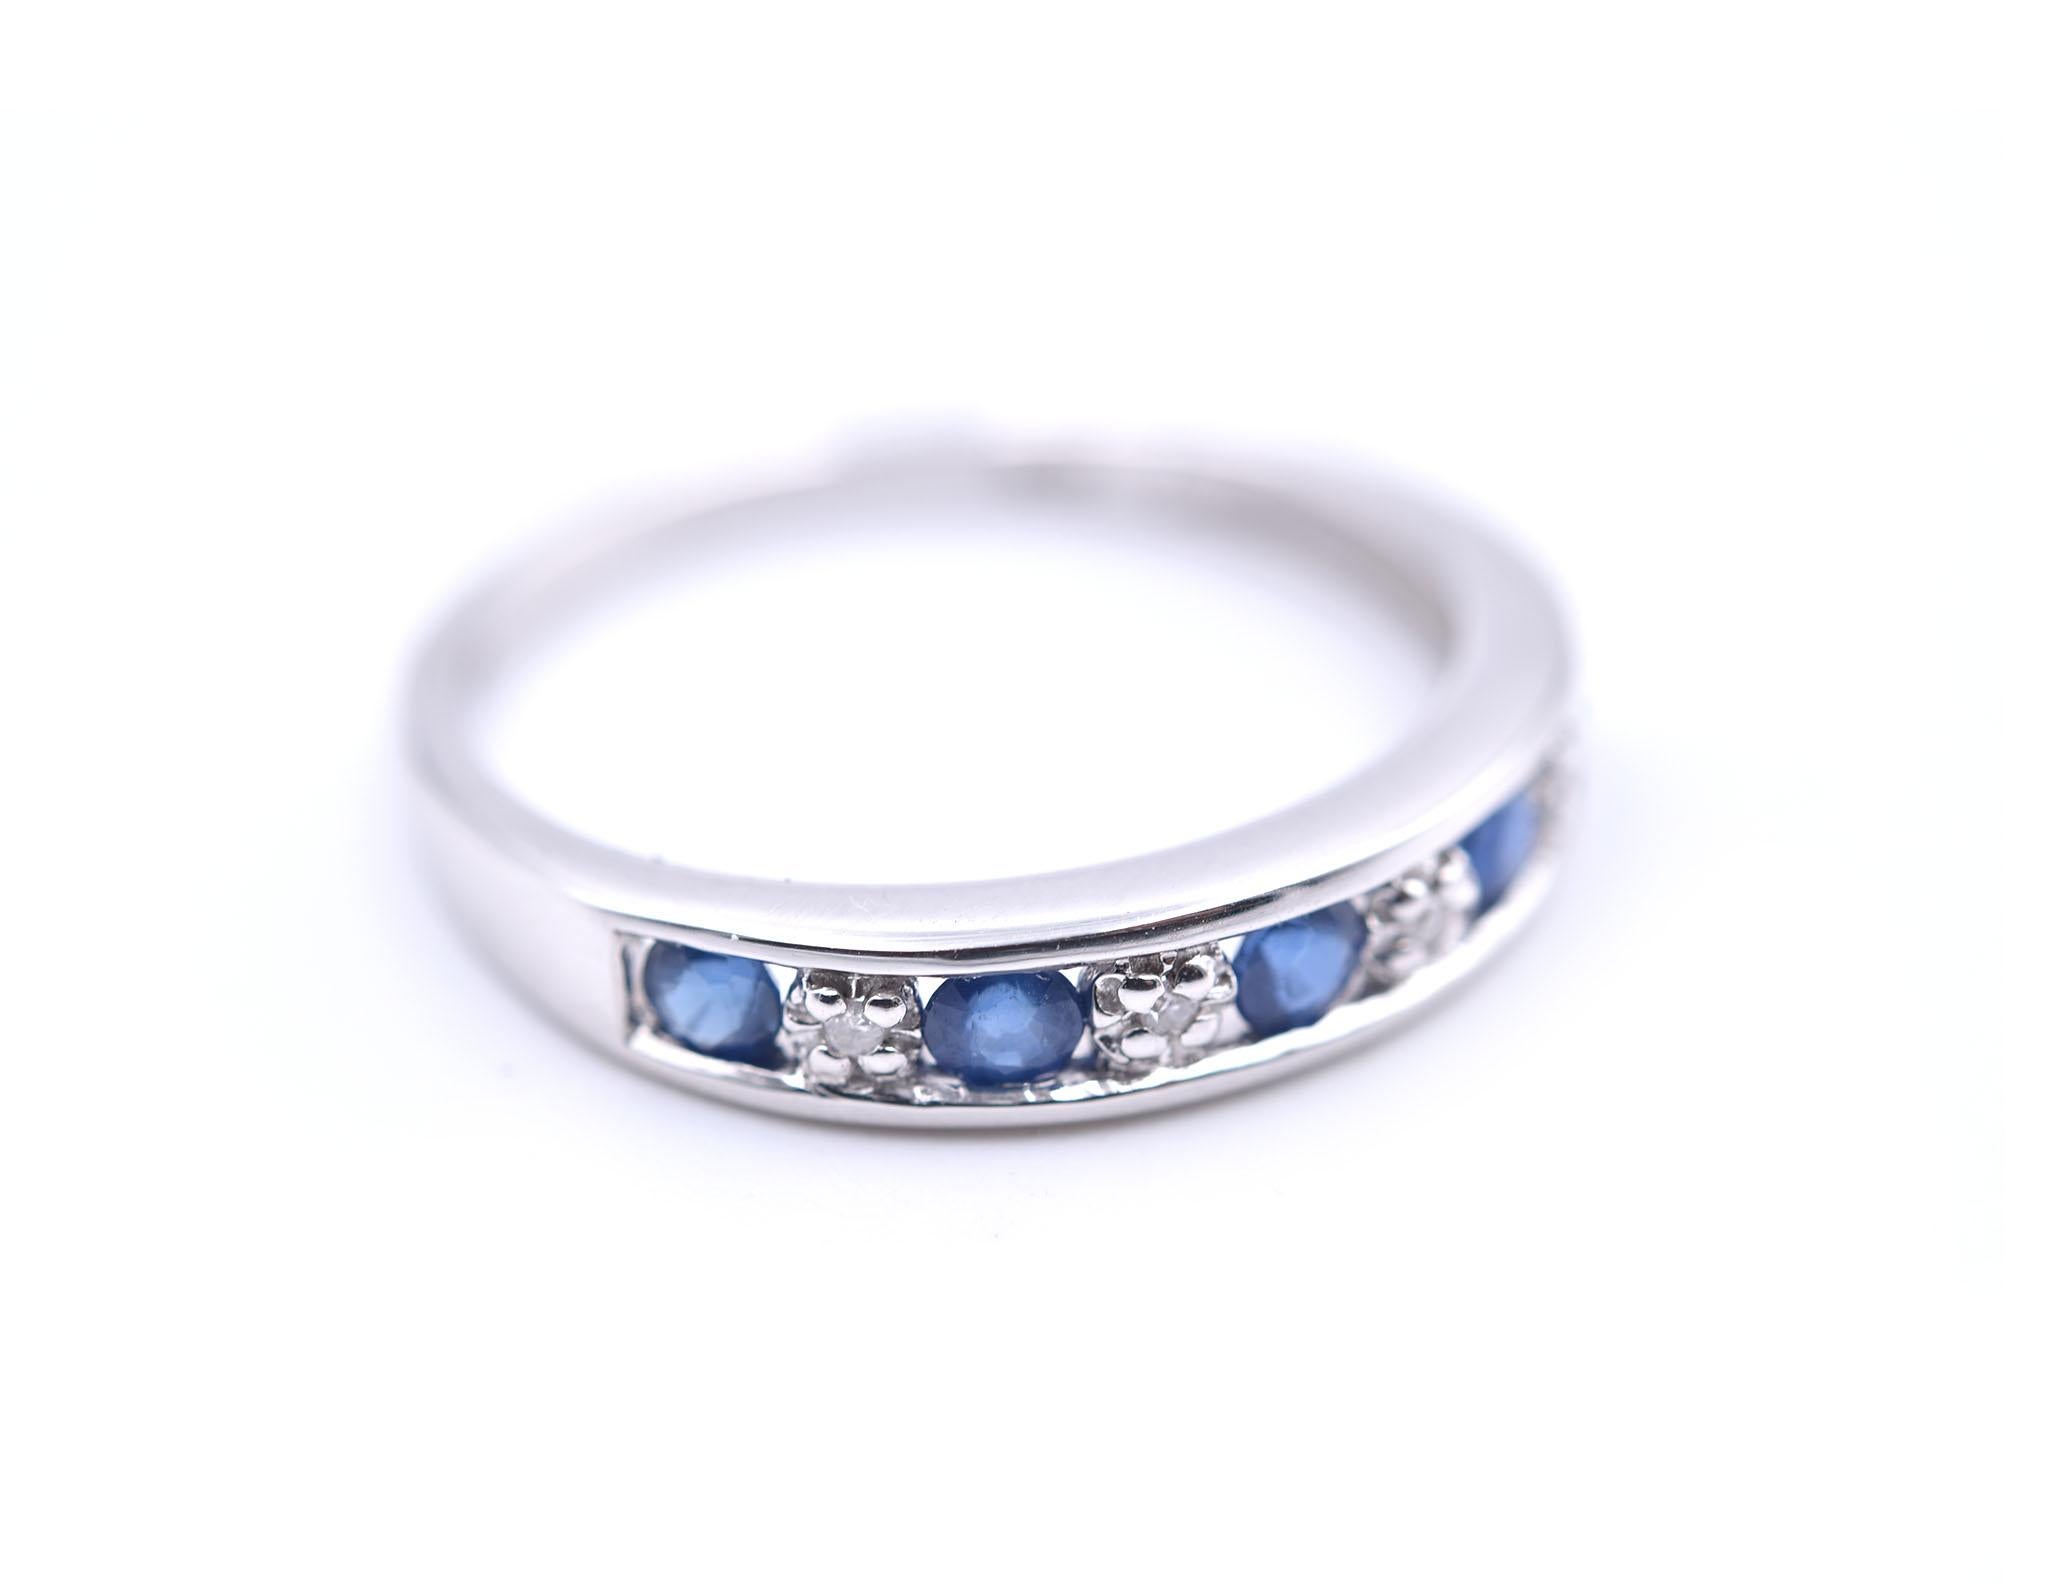 Designer: custom design
Material: 14k white gold
Sapphire: 5 sapphire round cut= .25cttw
Diamonds: 4 round cut= .02cttw
Color: G	
Clarity: VS
Ring size: 7 (please allow two additional shipping days for sizing requests)
Dimensions: ring is 3.95mm